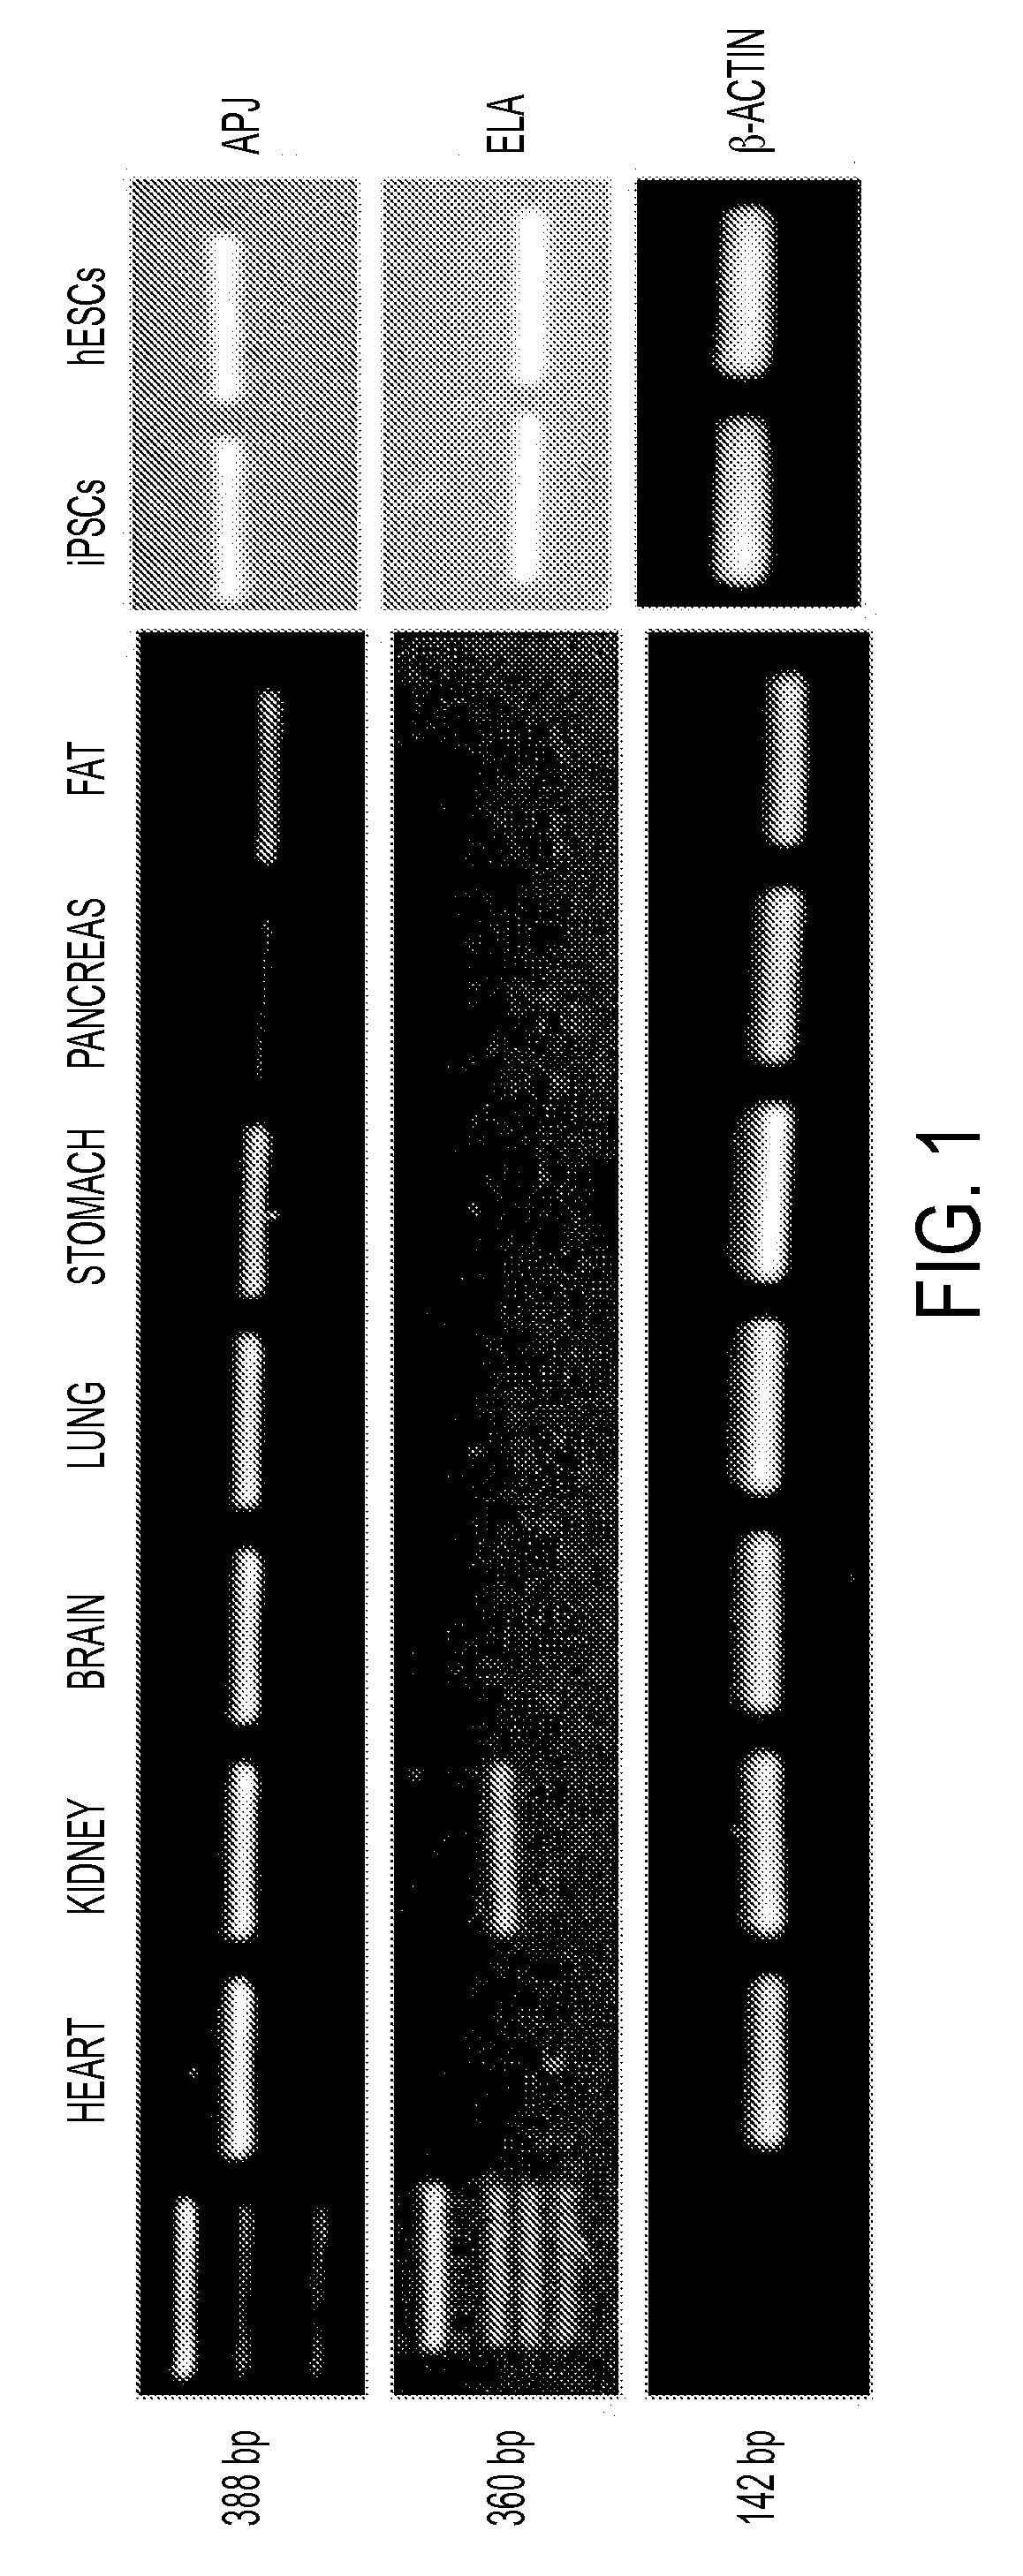 Methods for treating cardiovascular dysfunction and improving fluid homeostasis with a peptide hormone